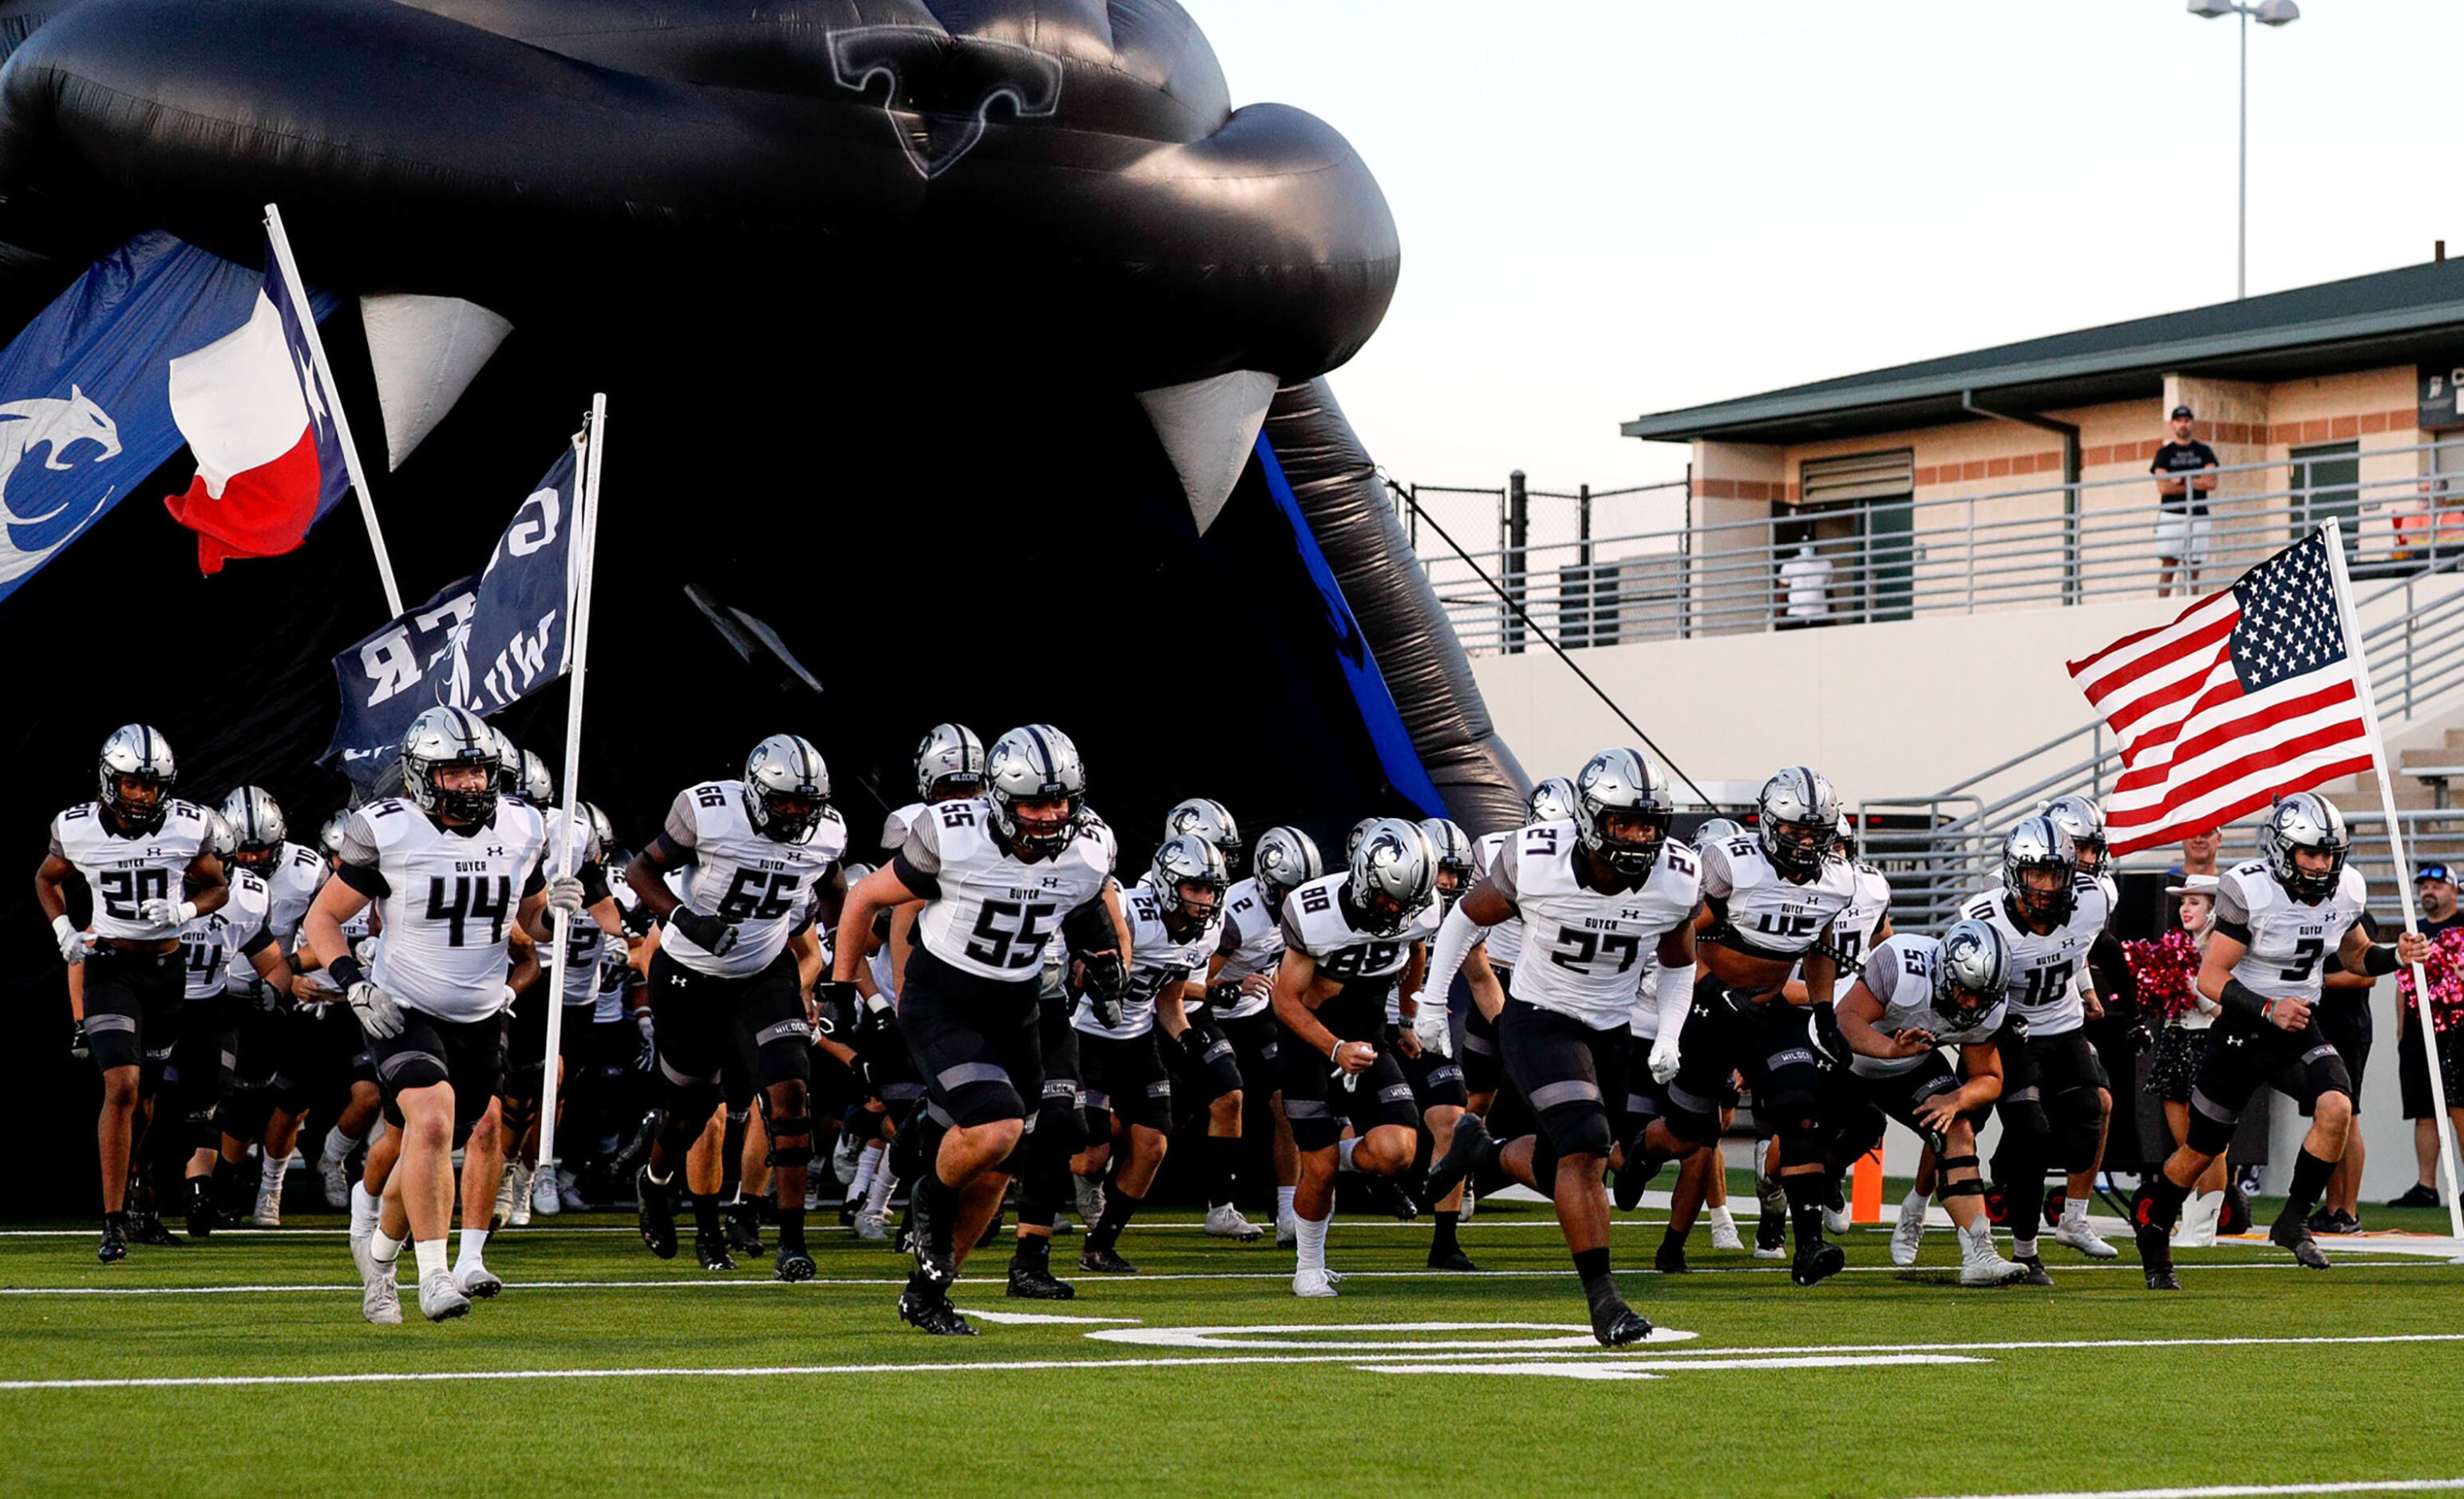 The Denton Guyer Wildcats enter the field to face Denton Braswell in a District 5-6A high...